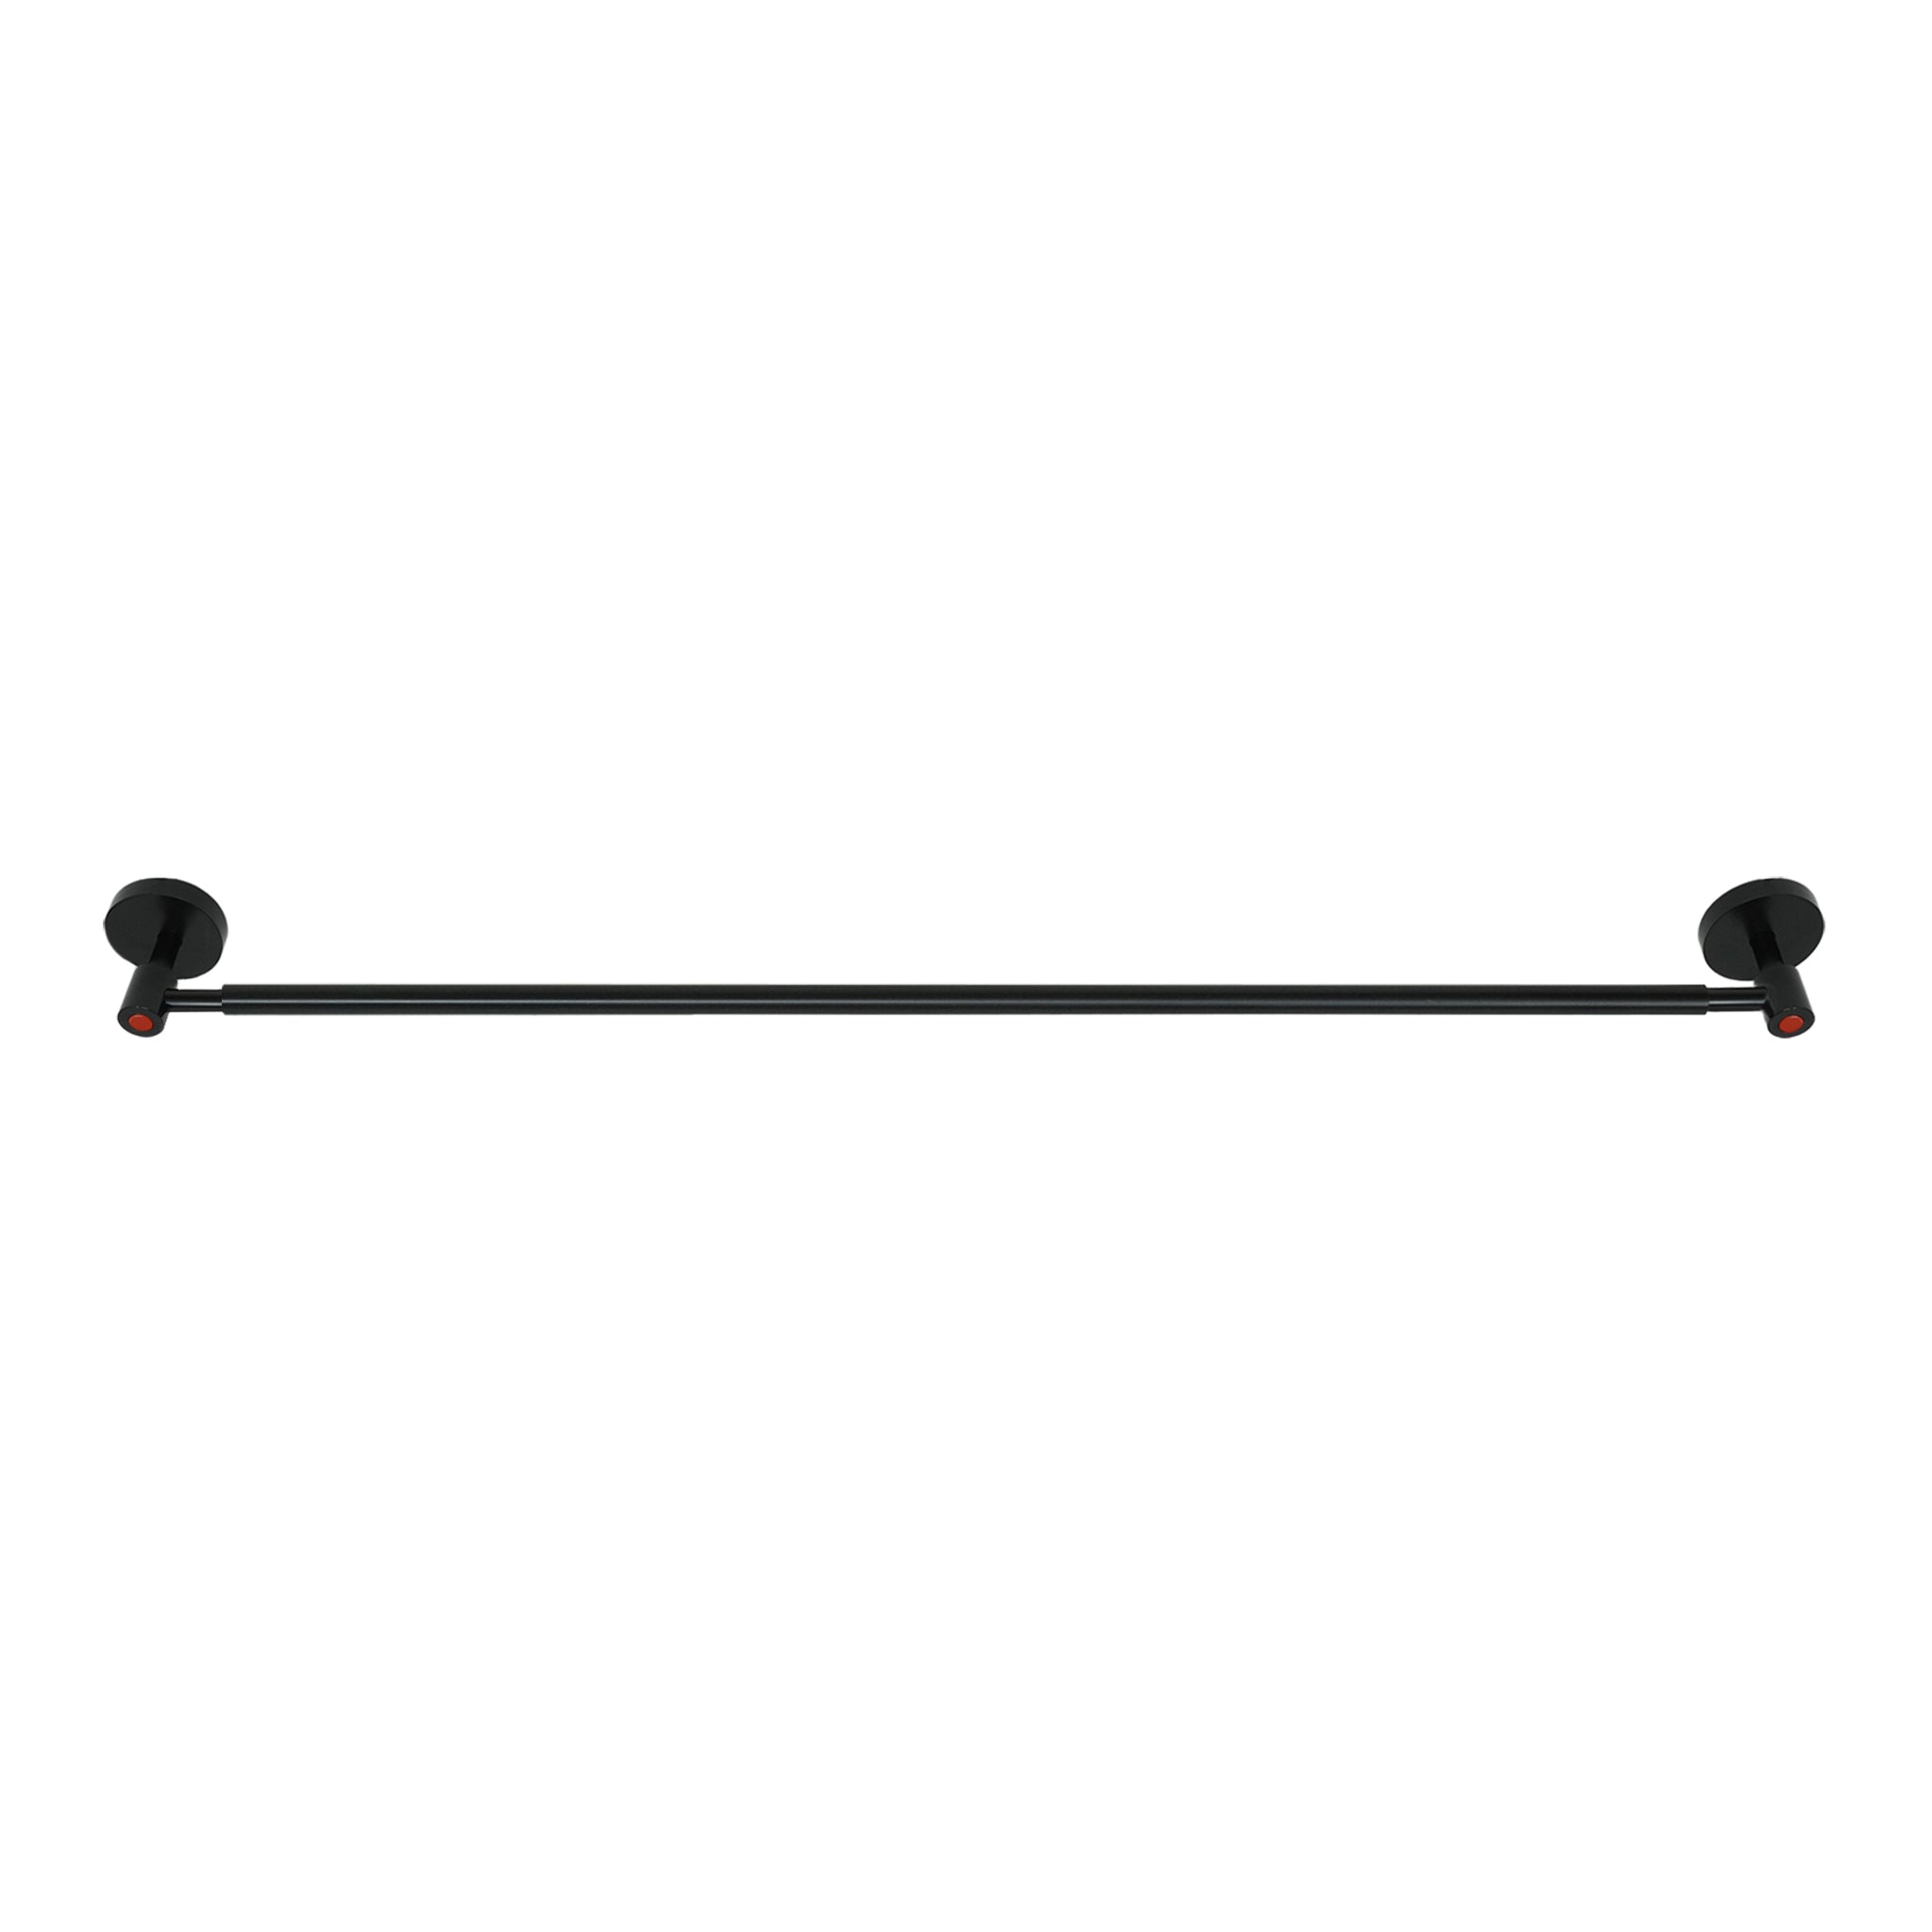 Black and riding hood red color Head towel bar 24" Dutton Brown hardware